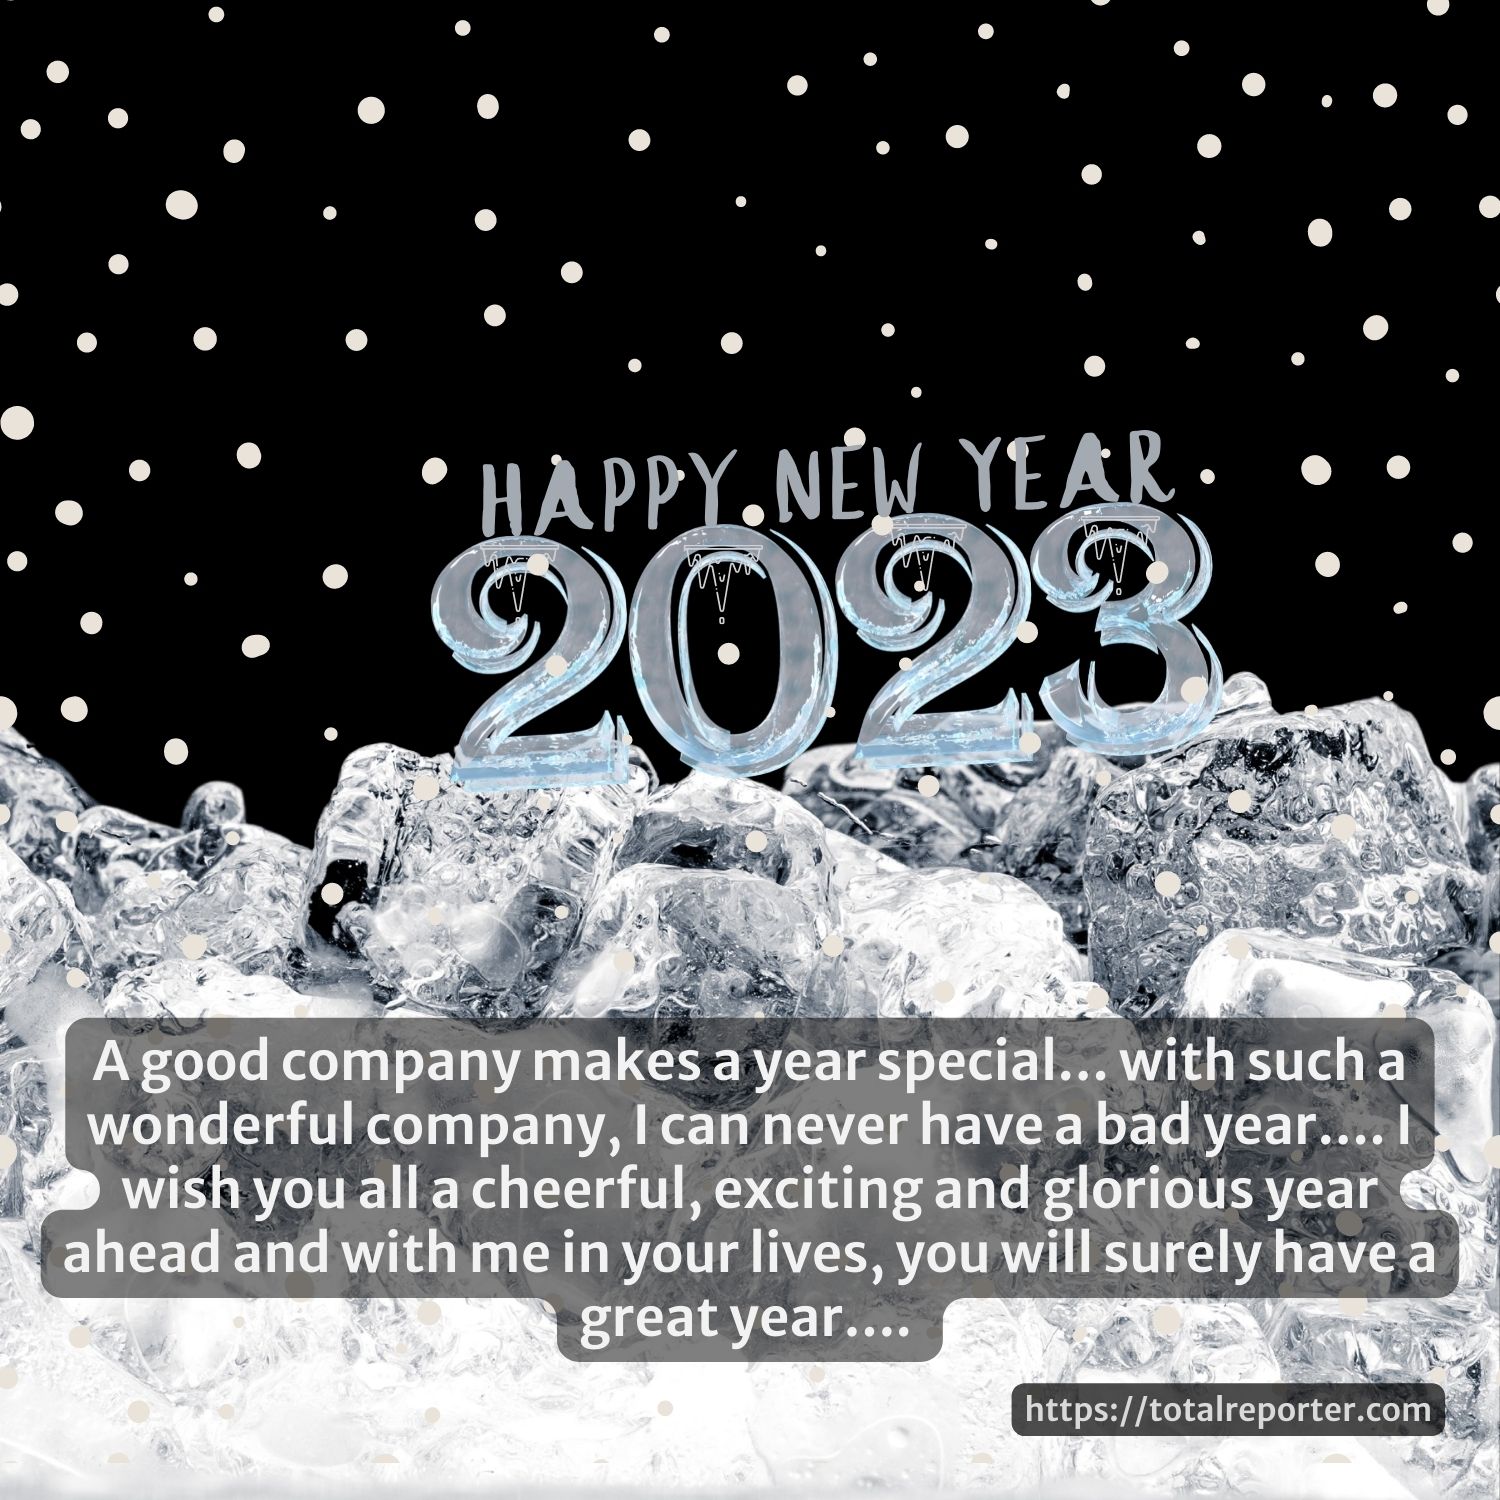 Happy New Year 2023 wishes Images